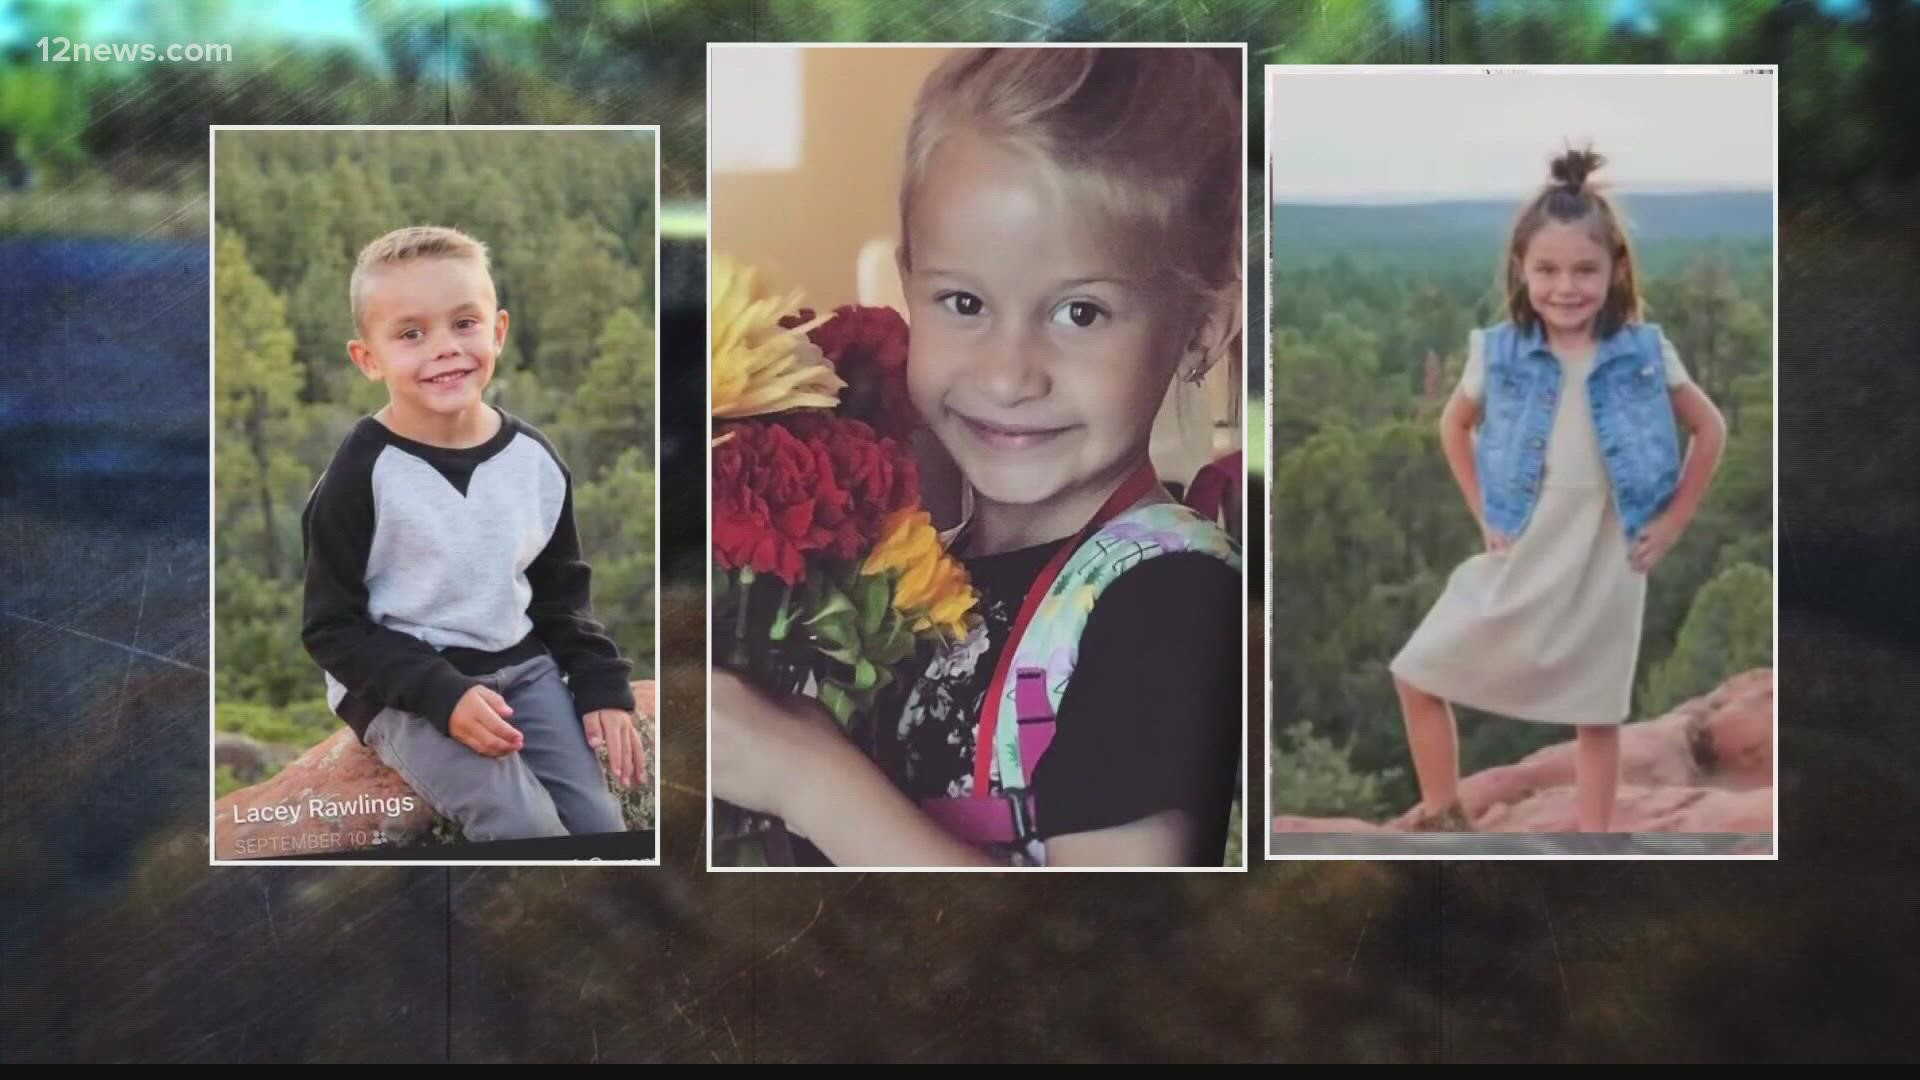 Two years ago, three children were swept away and died in the raging waters of Tonto Creek. A bridge that might've prevented the tragedy is scheduled for March.